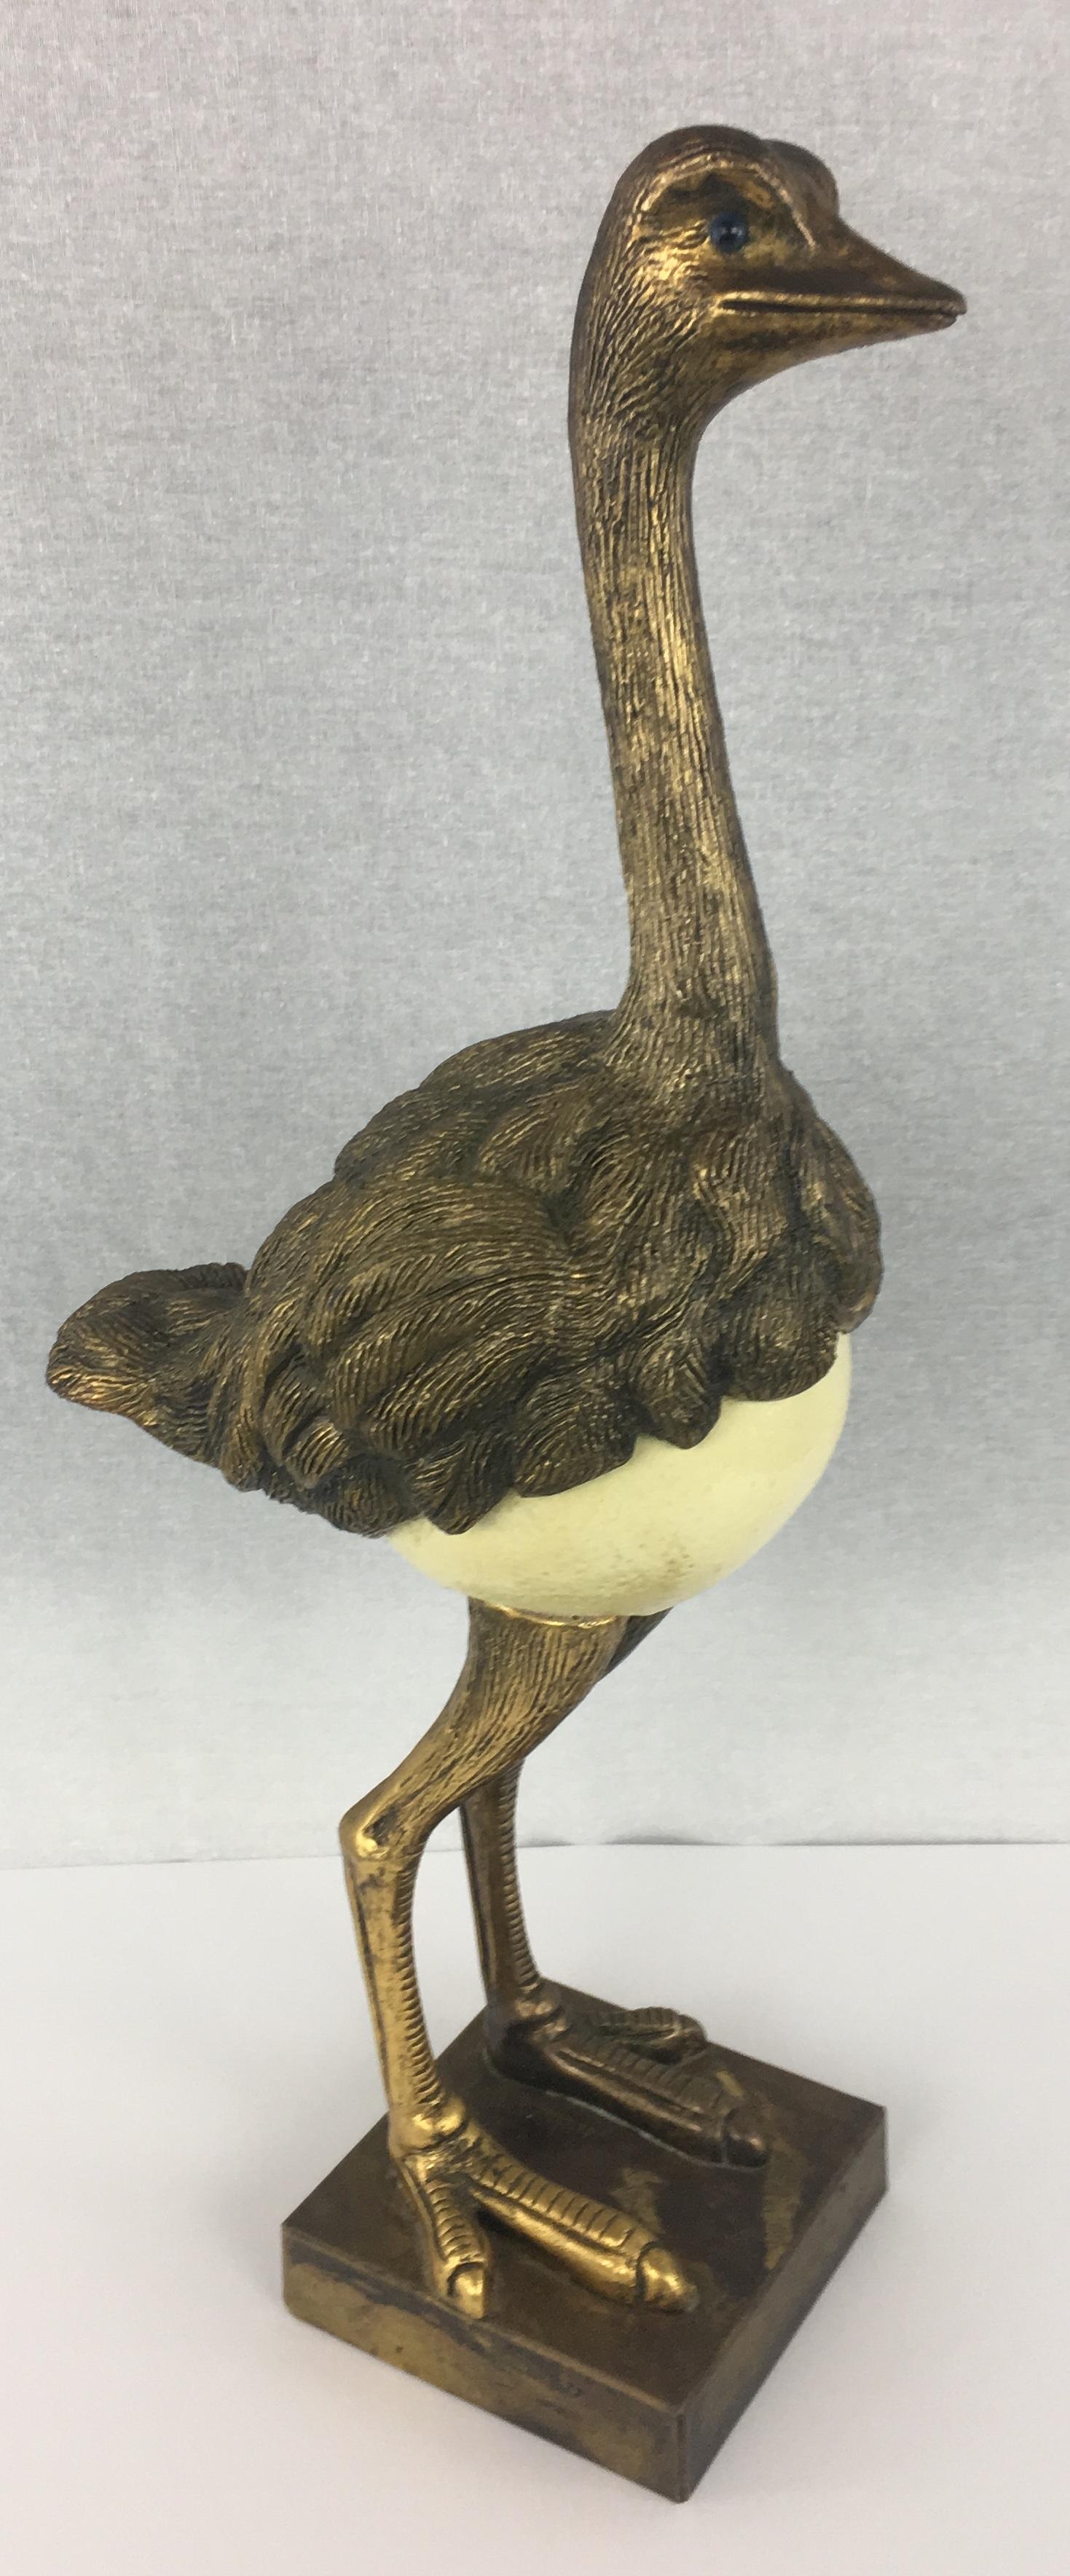 Unique Midcentury Ostrich Sculpture by Anthony Redmile and Gabriella Binazzi 2